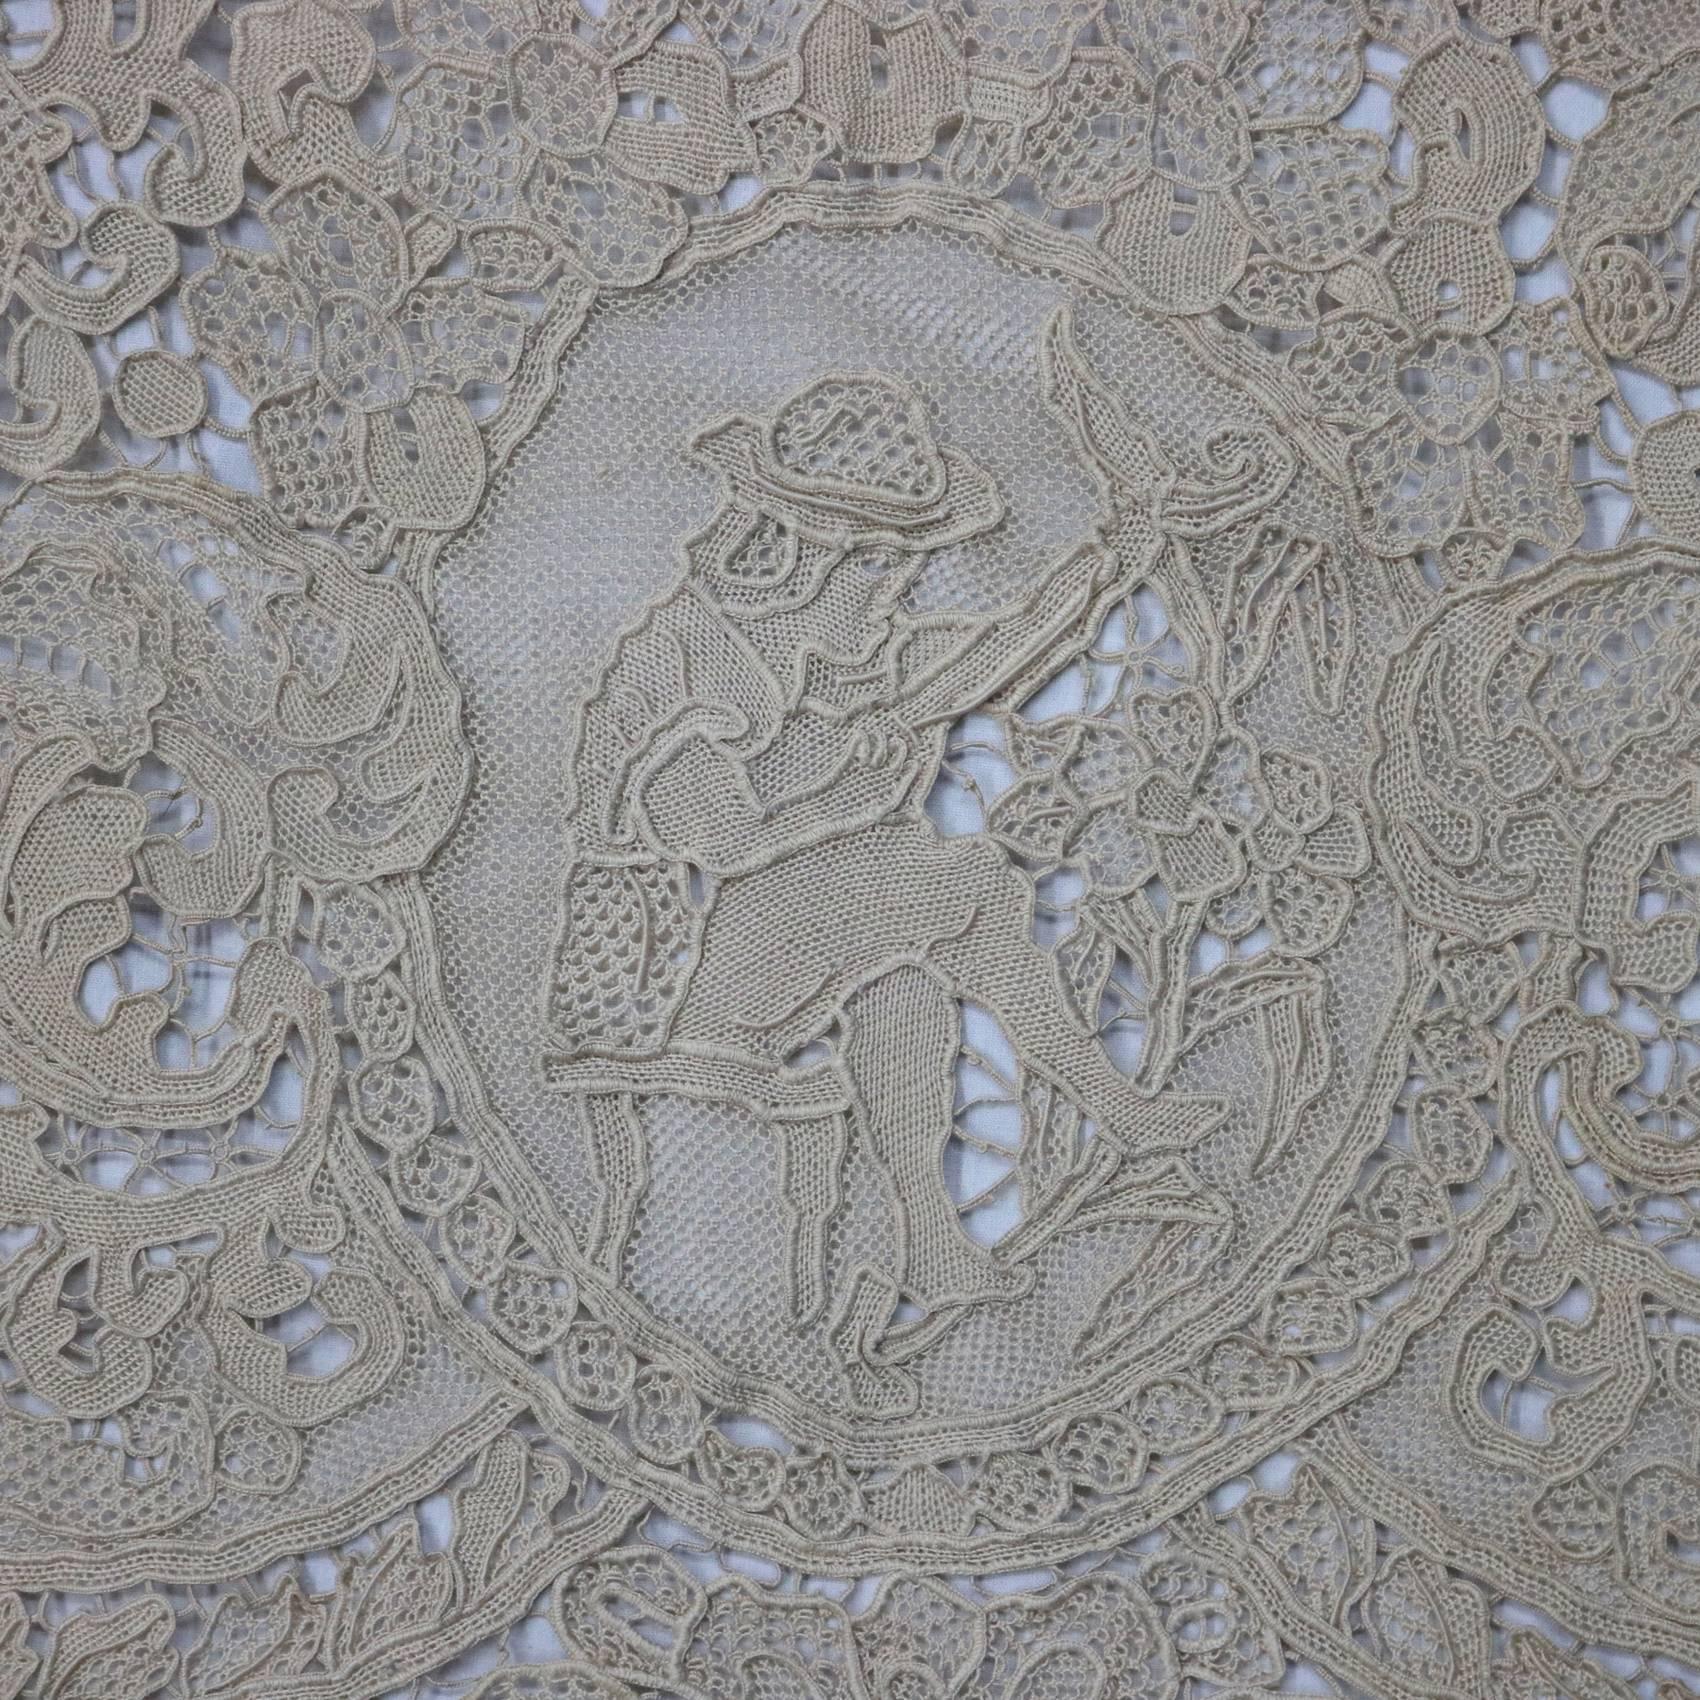 Hand-Crafted Large Antique Handmade Belgian Zele Figural Needle Lace Table Cloth, 19th C